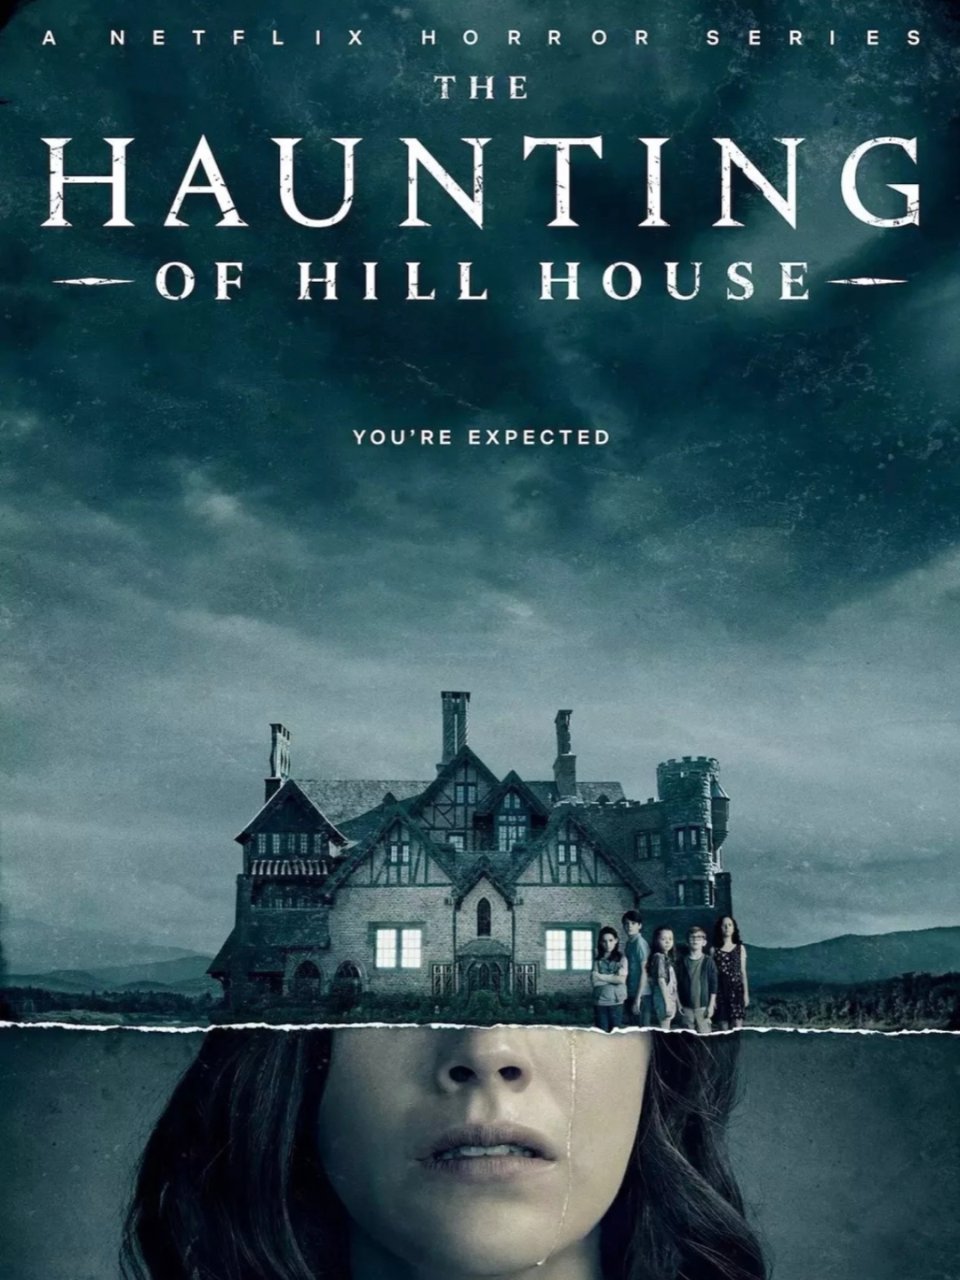 The Haunting of Hill House | Netflix Off